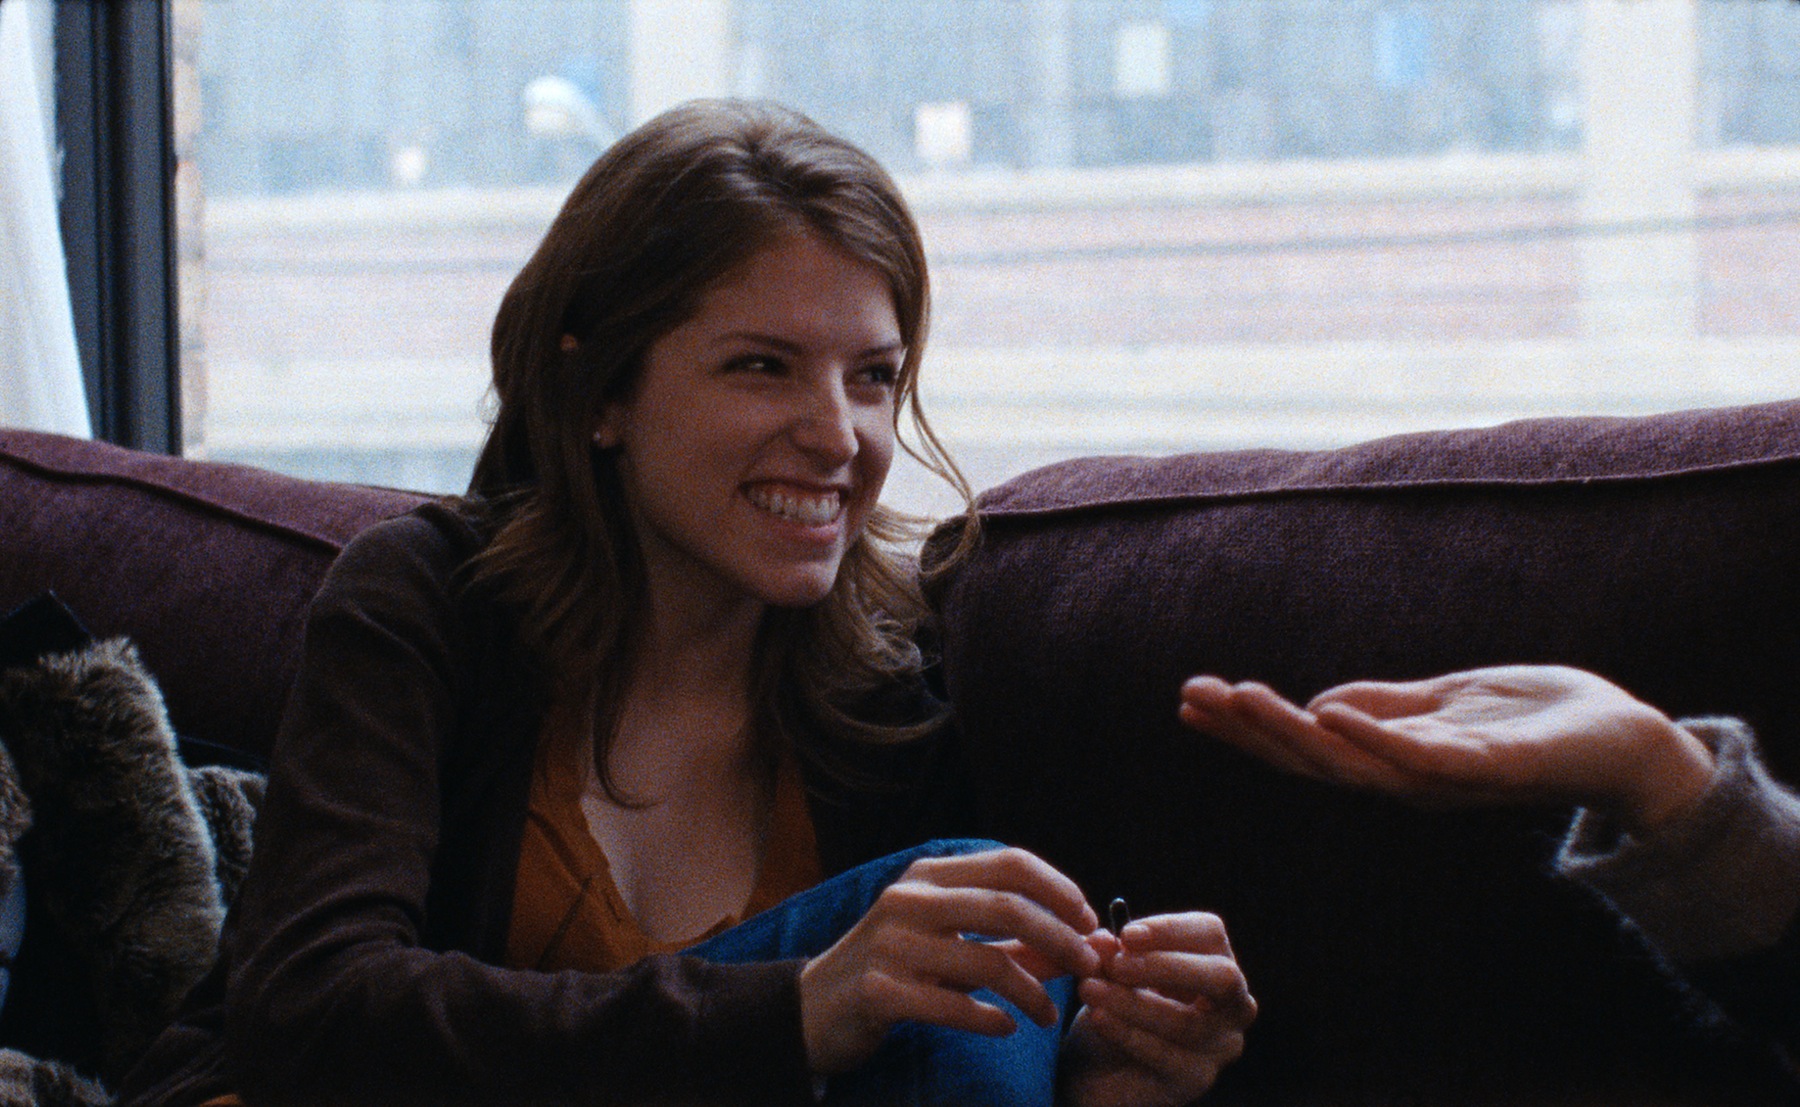 Anna Kendrick in 'Happy Christmas' (Magnolia Pictures)